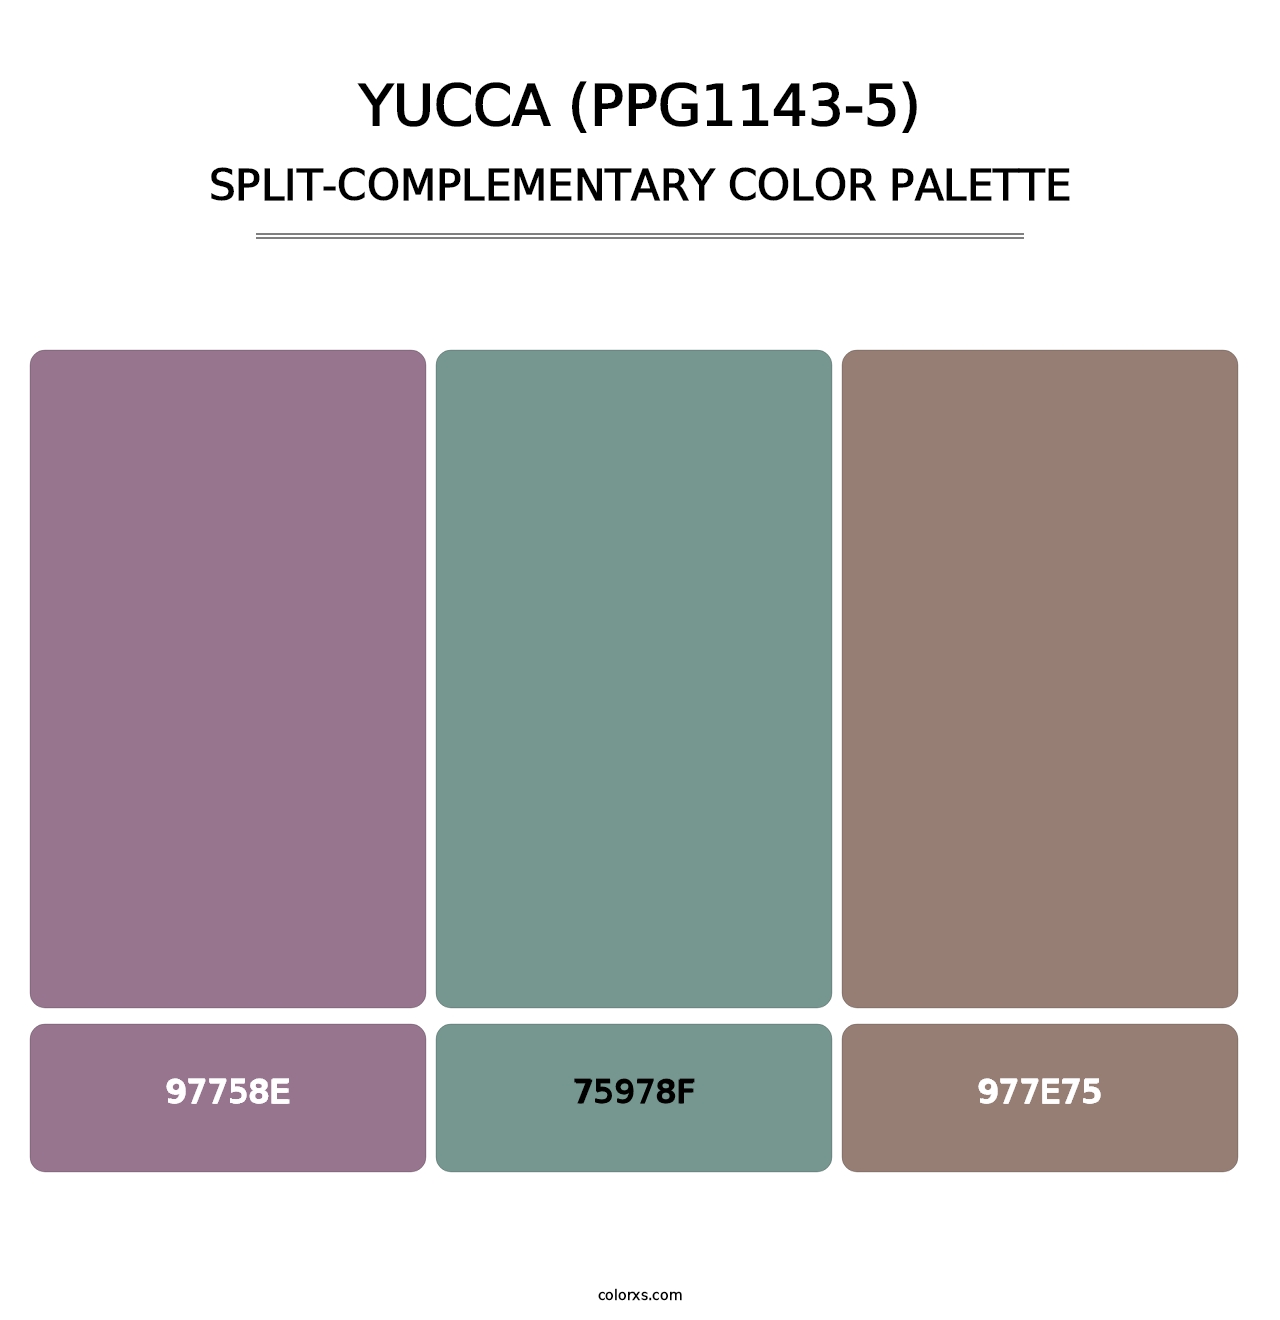 Yucca (PPG1143-5) - Split-Complementary Color Palette